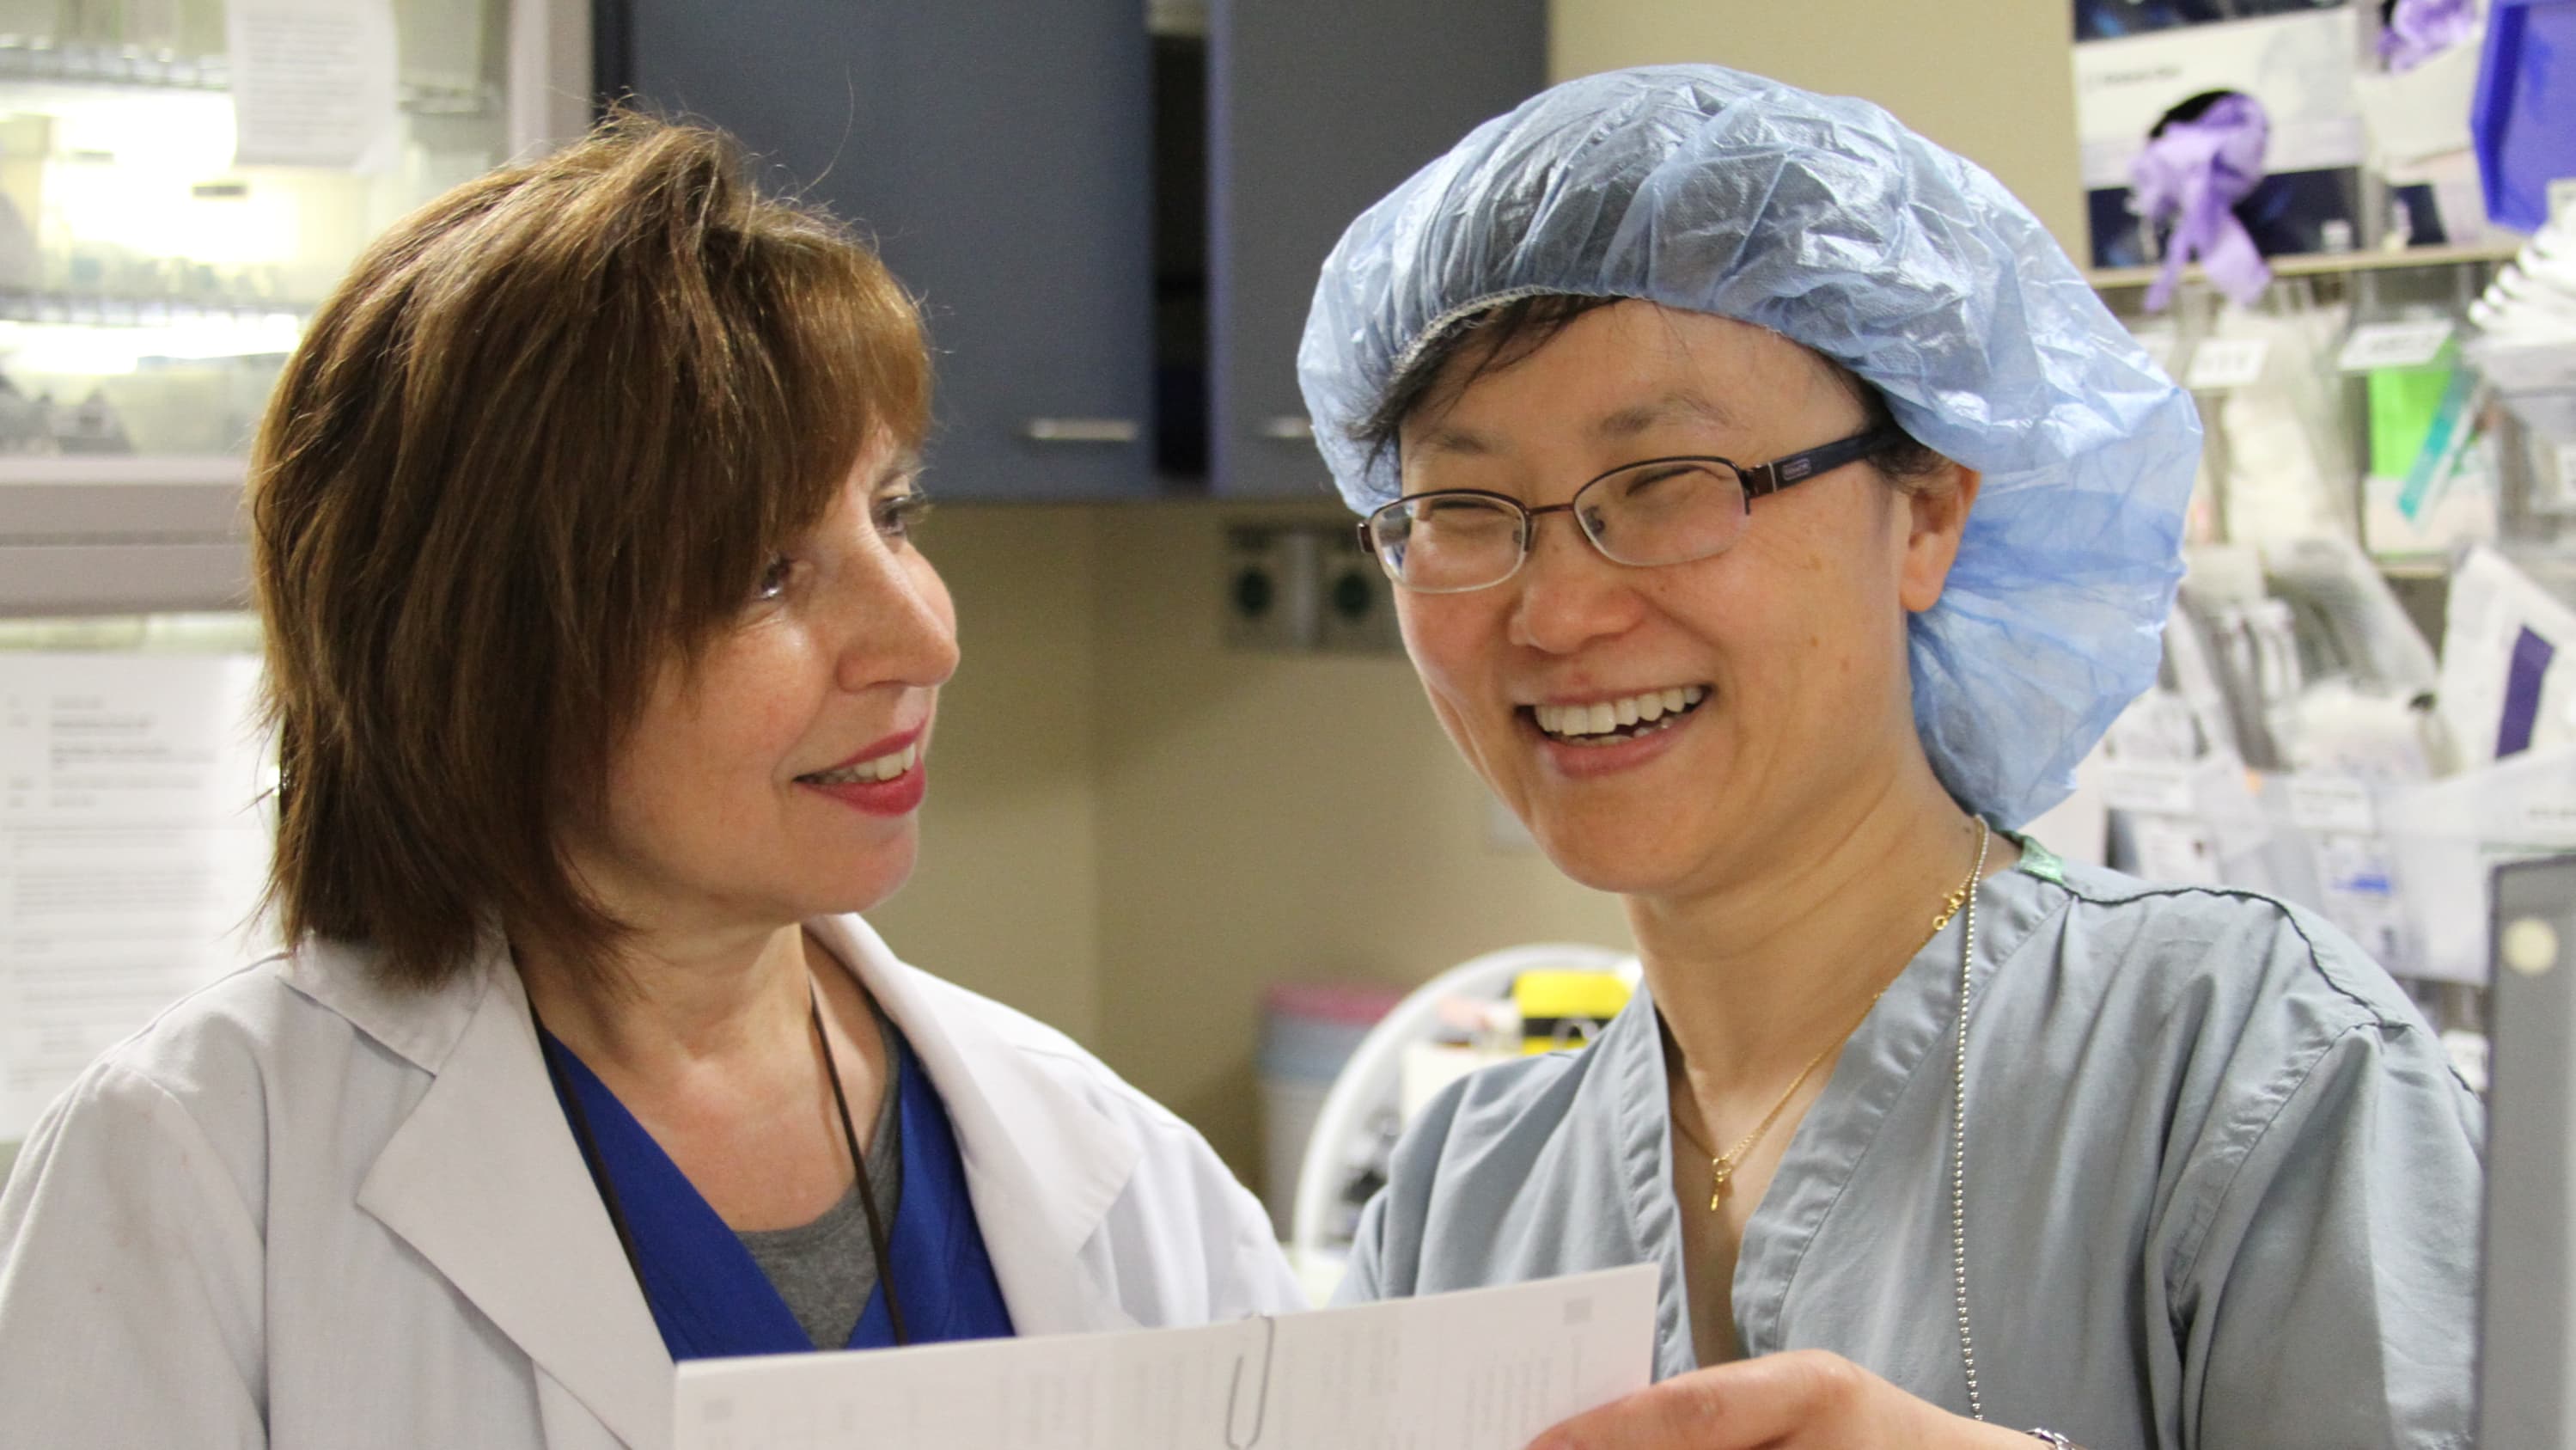 Nerve block nurse Lisa Mastrangello (on the left) with Jinlei Li, MD, an anesthesiologist, discussing a nerve block, which is a type of regional anesthesia.